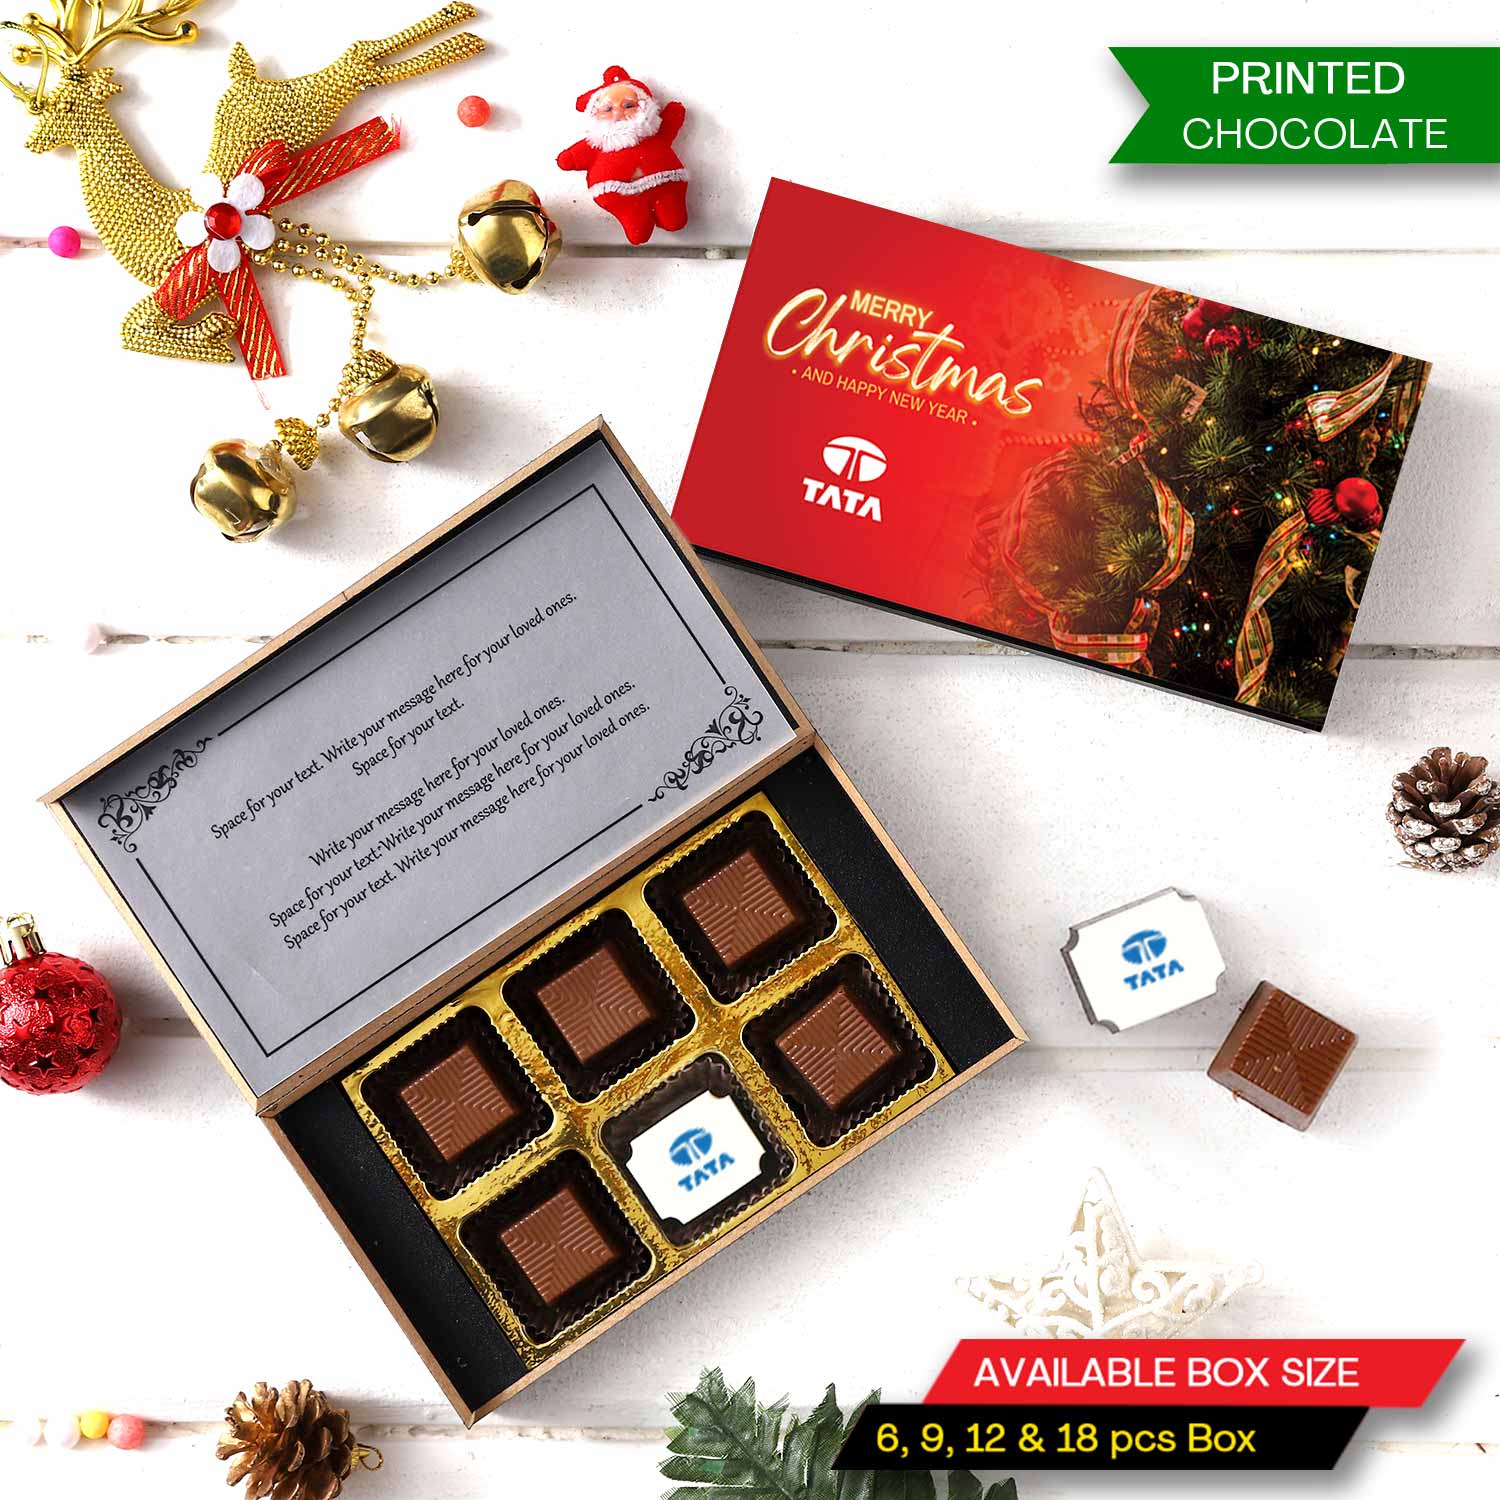 Buy Chocolate for New Year & Christmas Gifts for Corporates